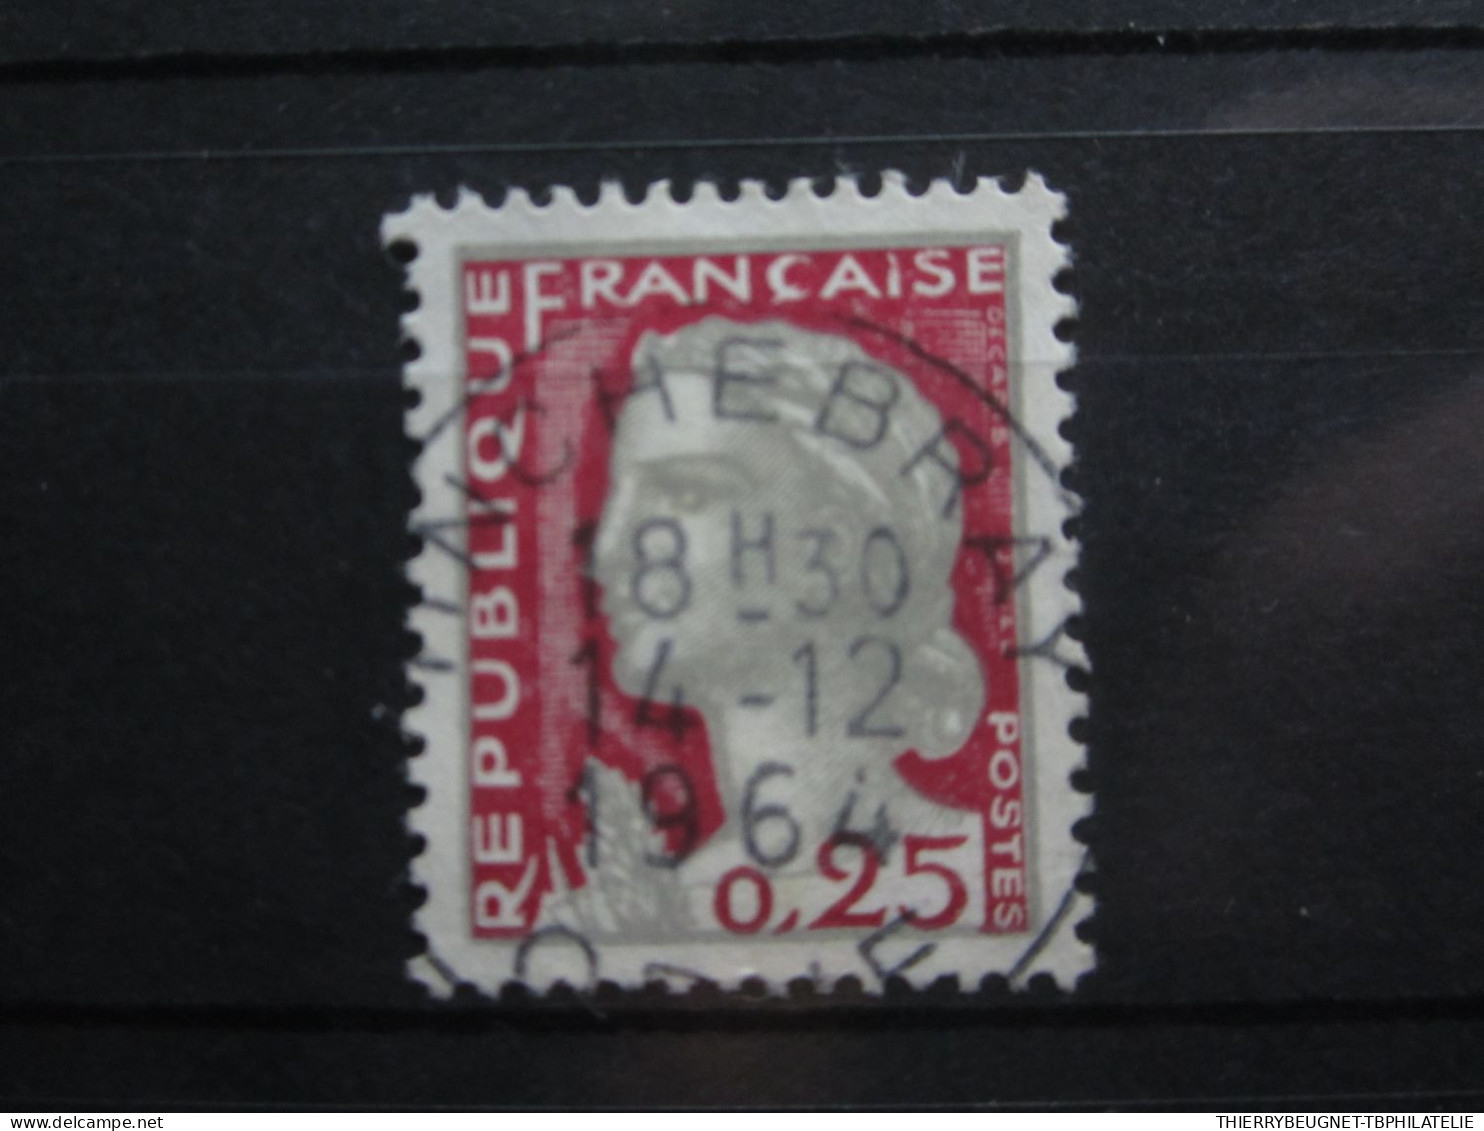 BEAU TIMBRE DE FRANCE N° 1263 - OBLITERATION TINCHEBRAY - 1960 Marianne Of Decaris